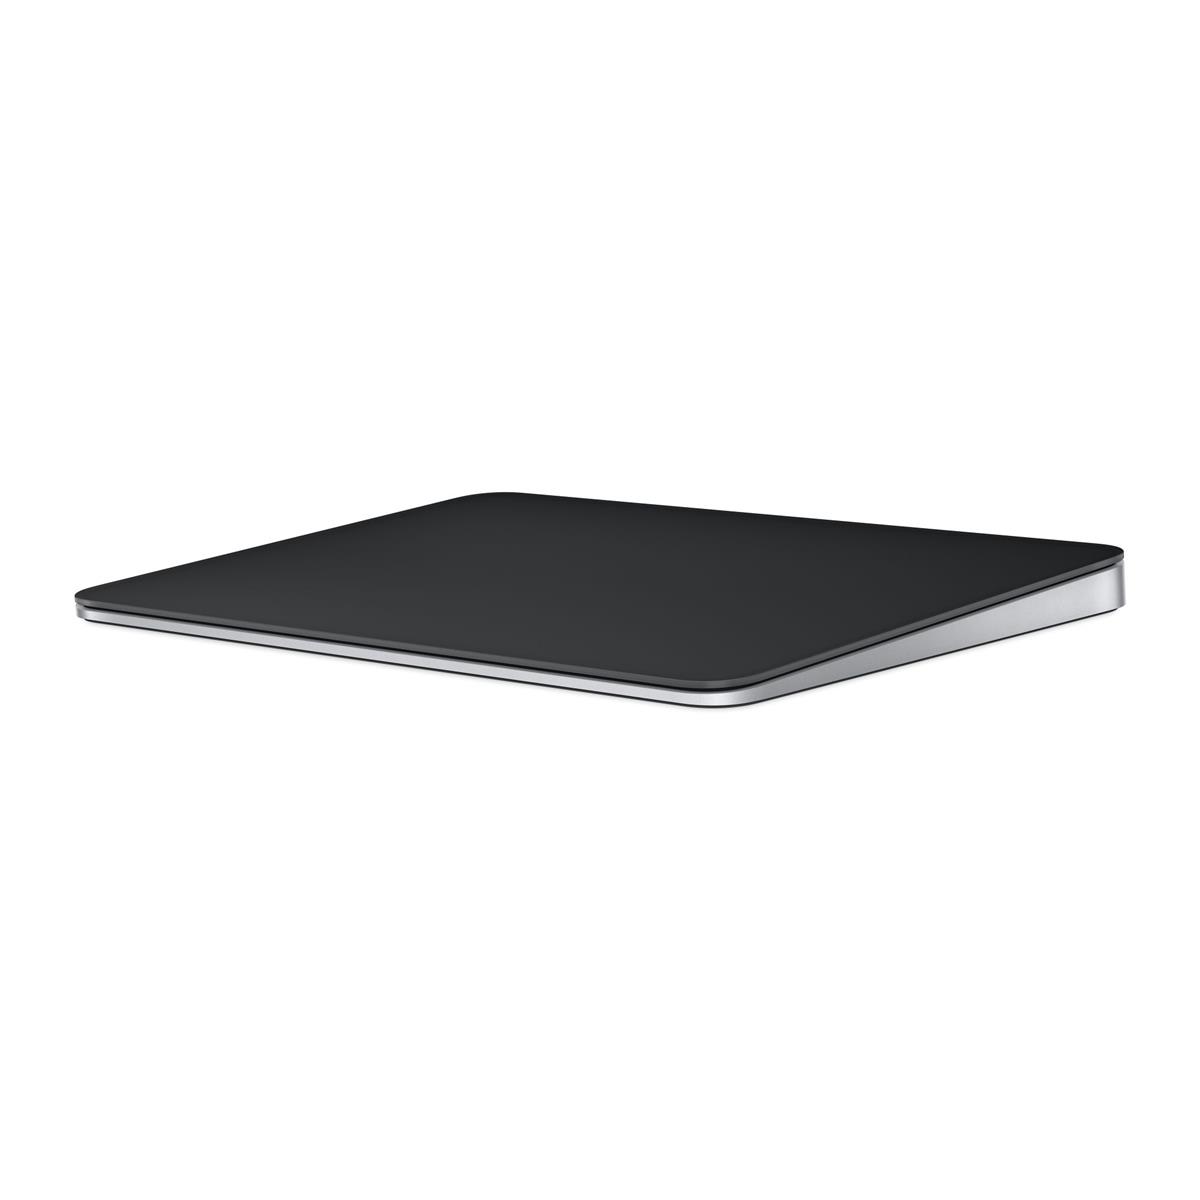 Image of Apple Multi-Touch Magic Trackpad for Apple iPad and Mac